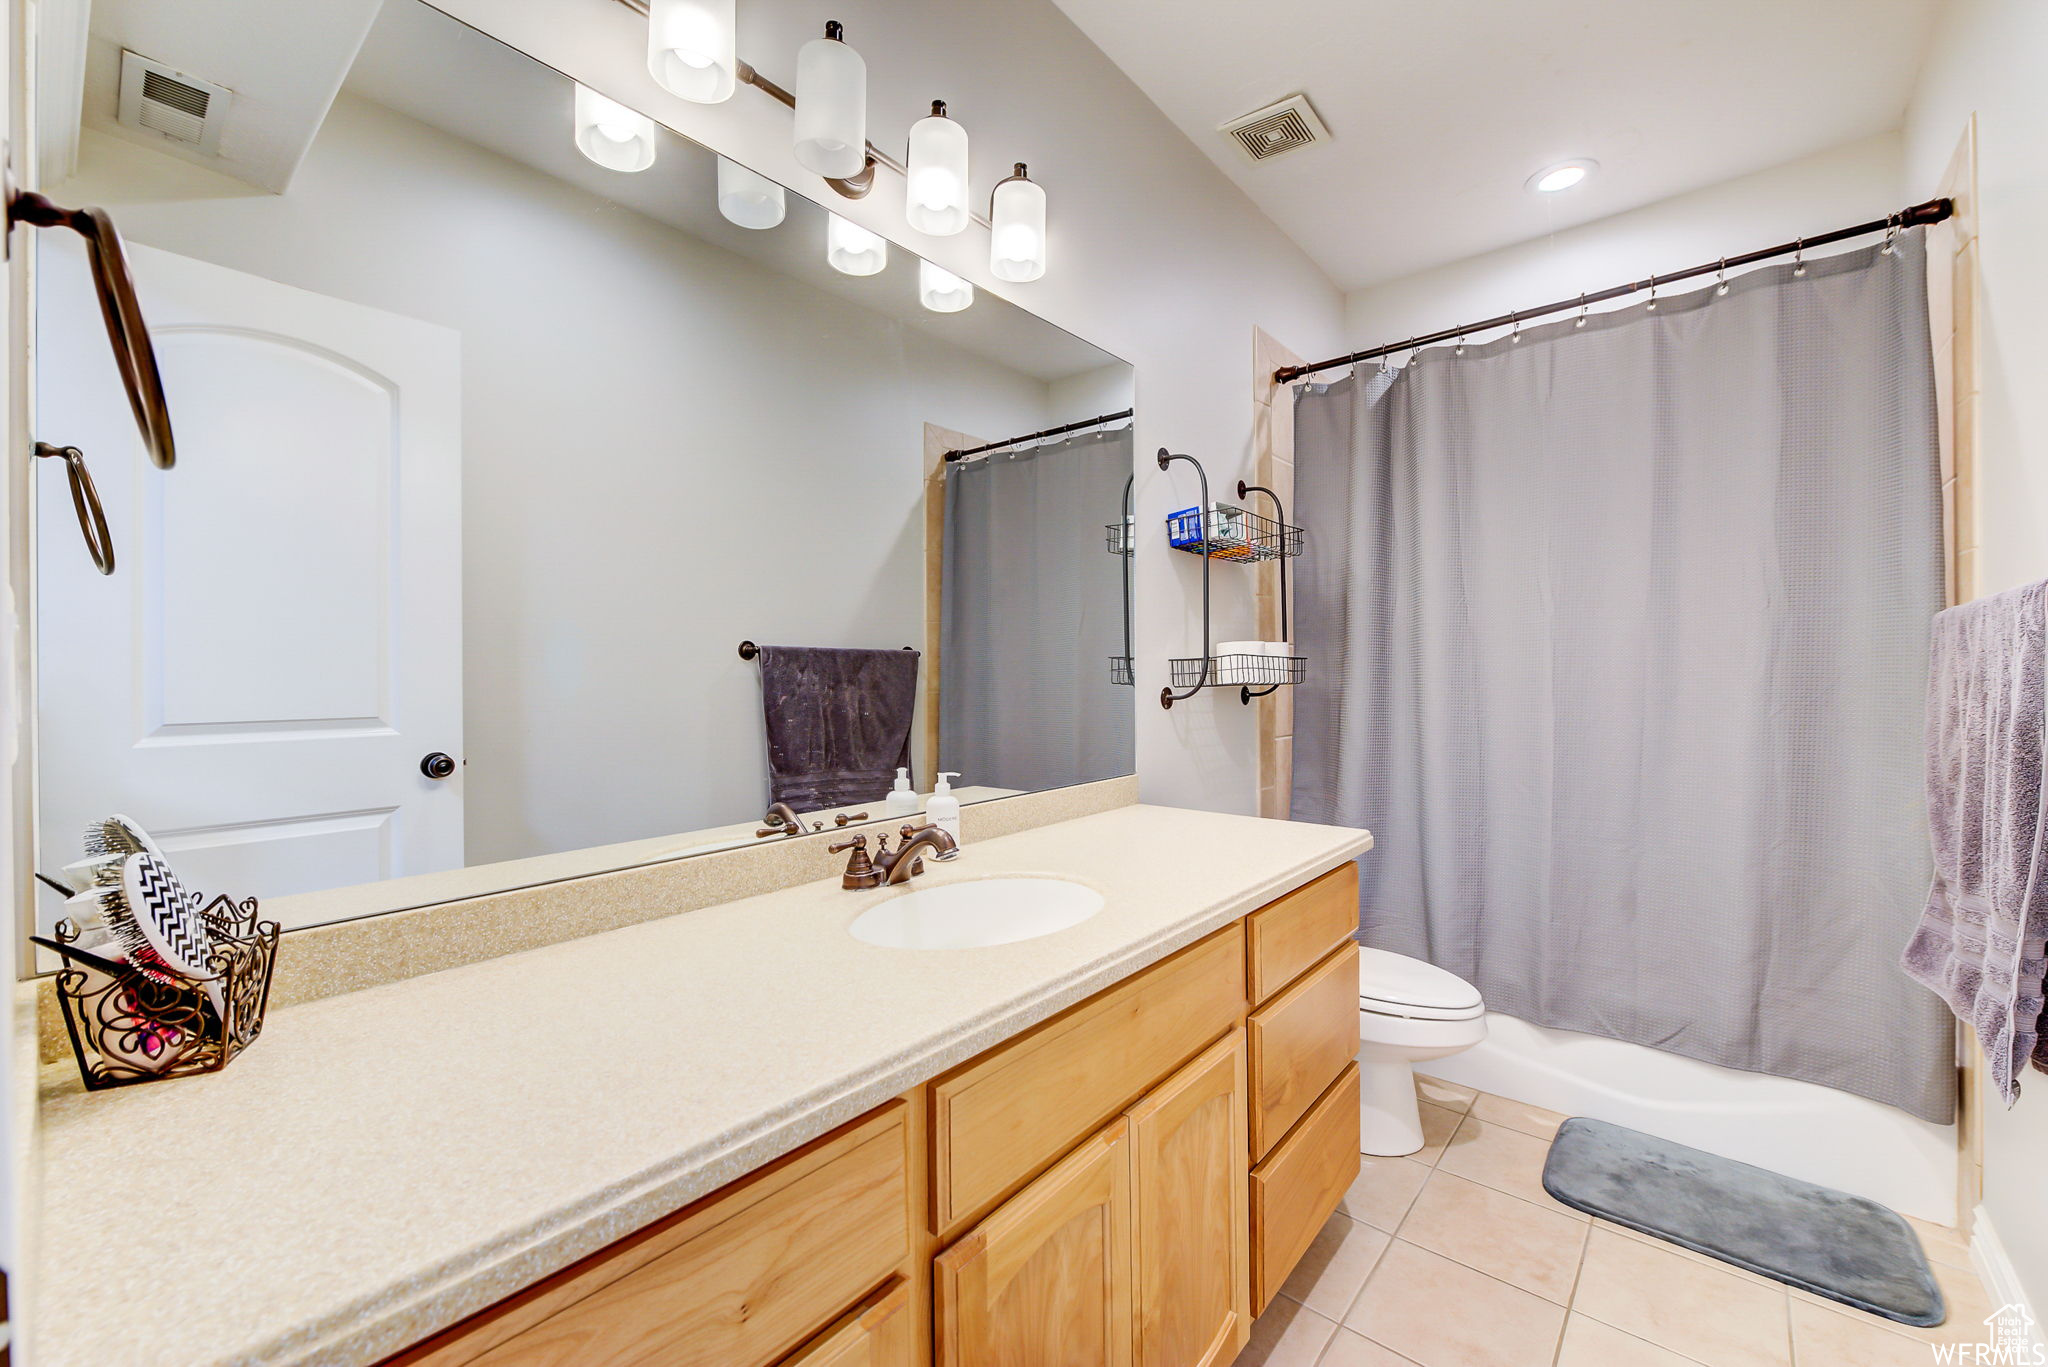 Full bathroom with vanity, toilet, shower / tub combo, and tile flooring